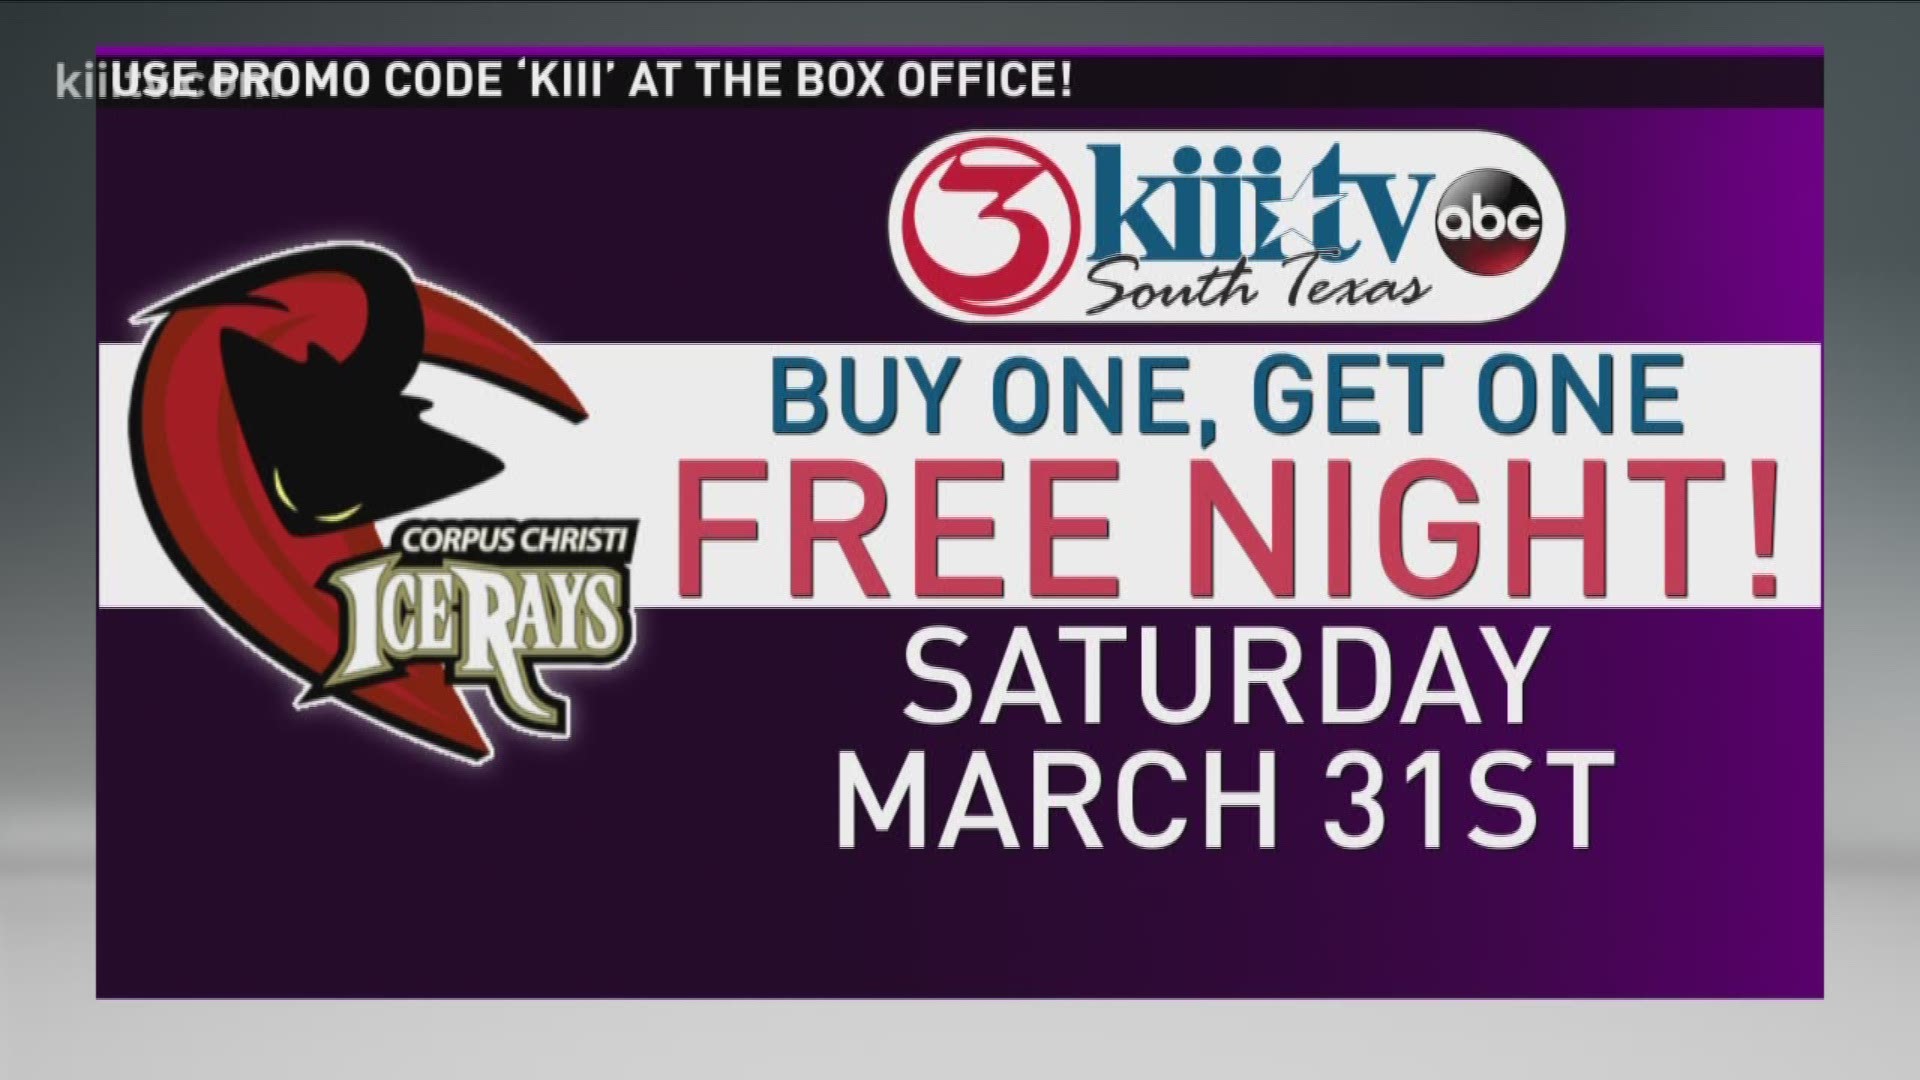 When you go to the American Bank Center Box Office and buy one ticket, tell the ticket taker "Kiii" to receive another ticket for free.